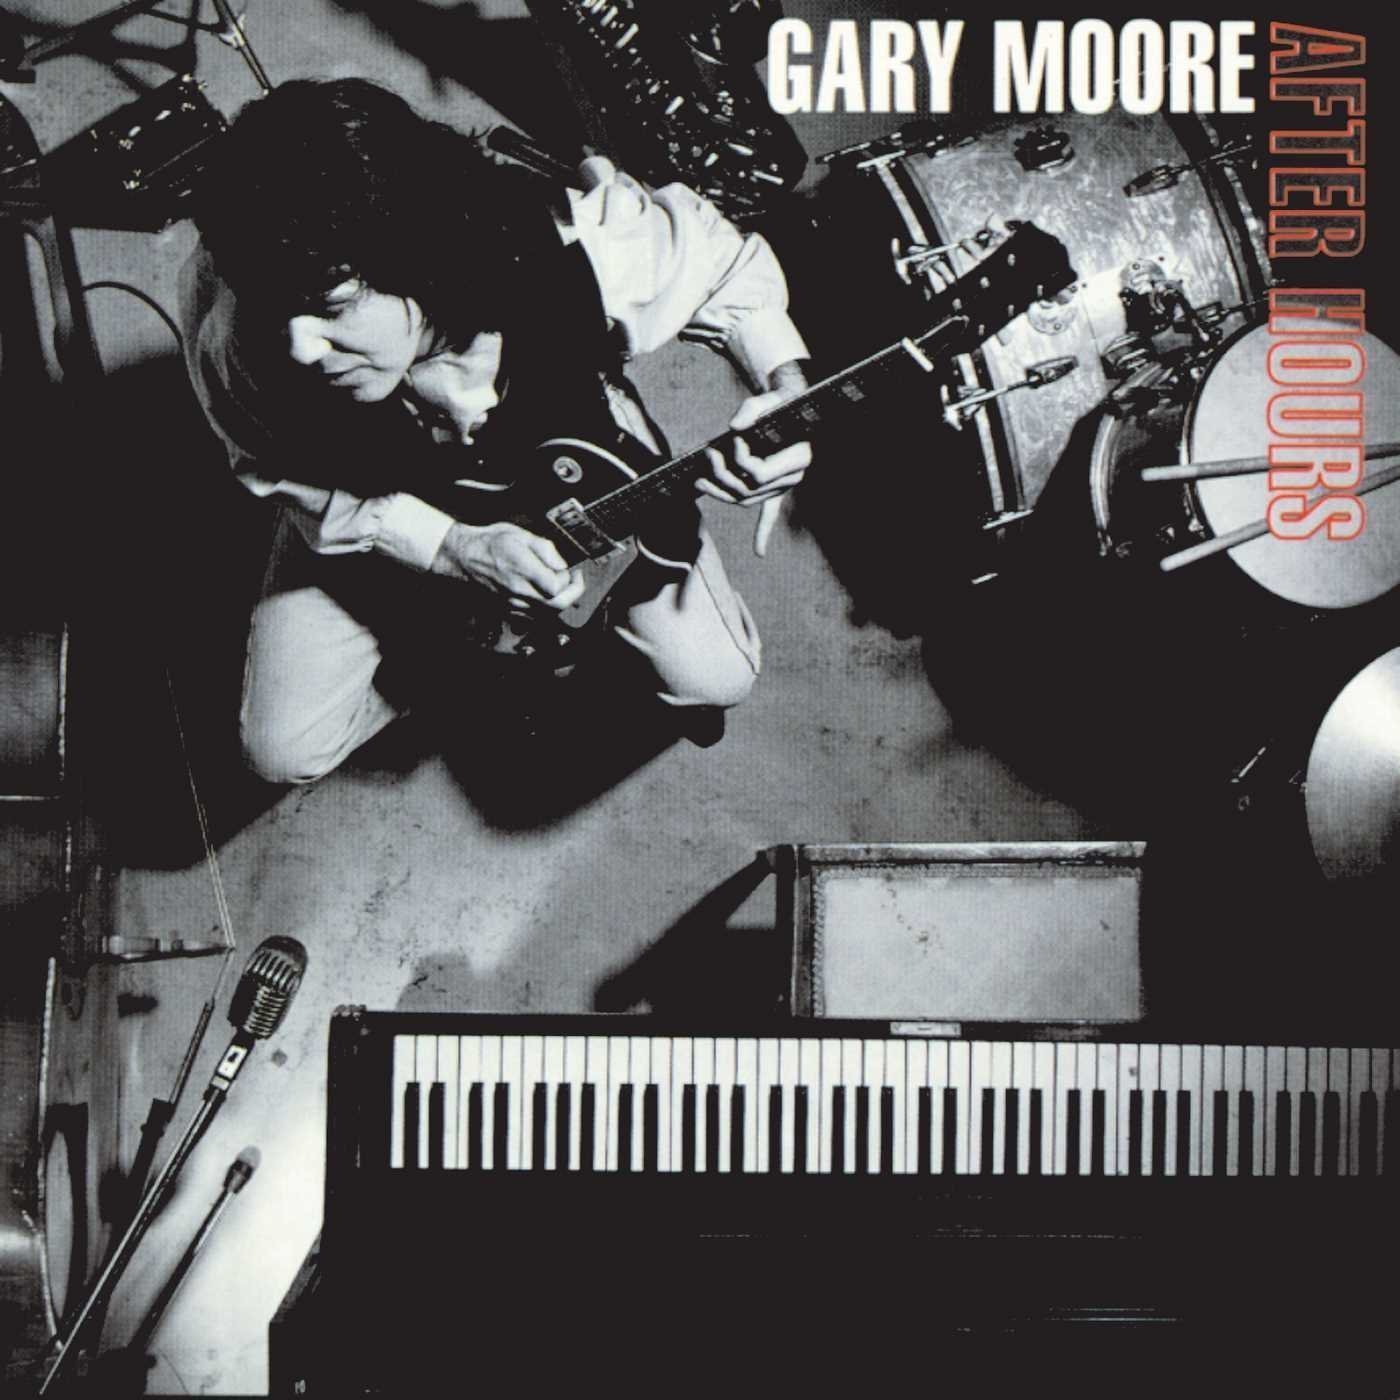 Vinyl Record Gary Moore - After Hours (LP)